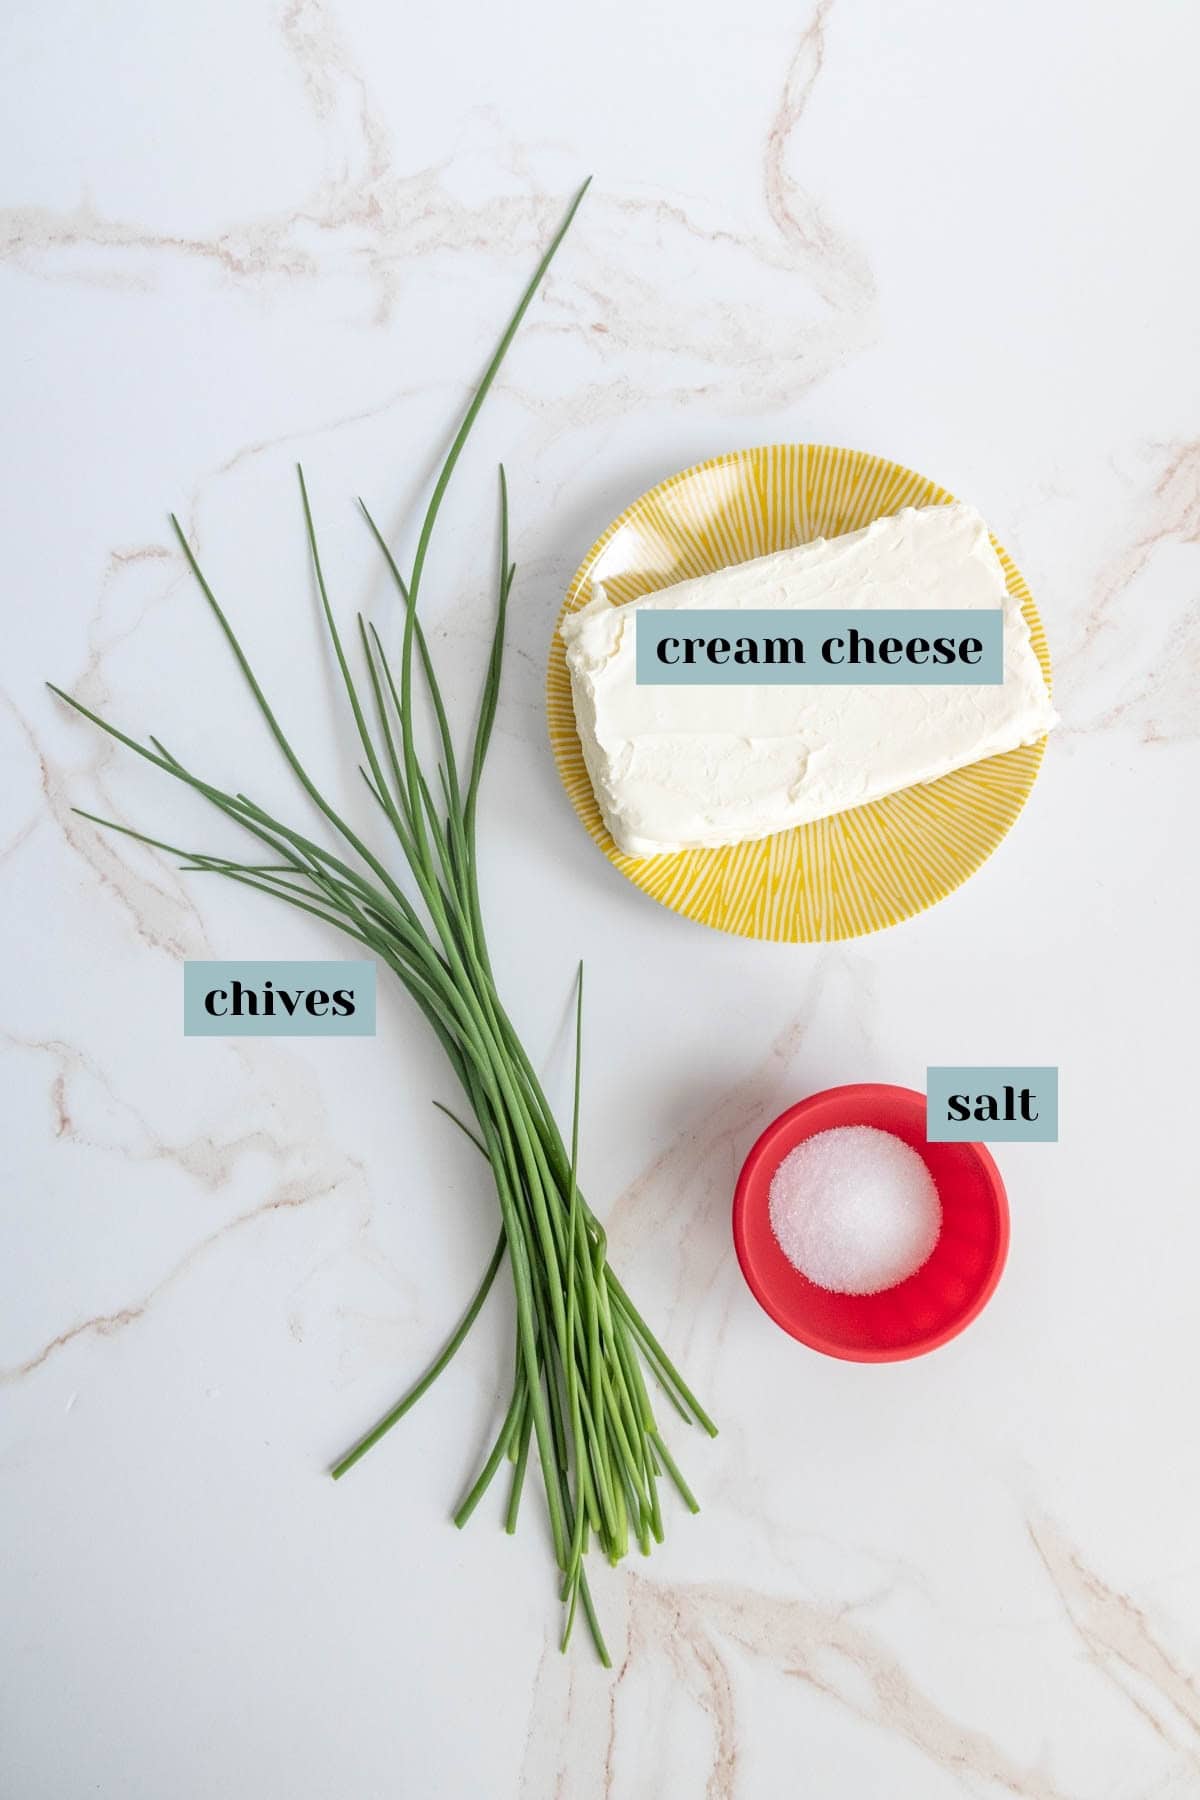 A container of cream cheese, fresh chives, and a small red bowl of salt on a marble surface.